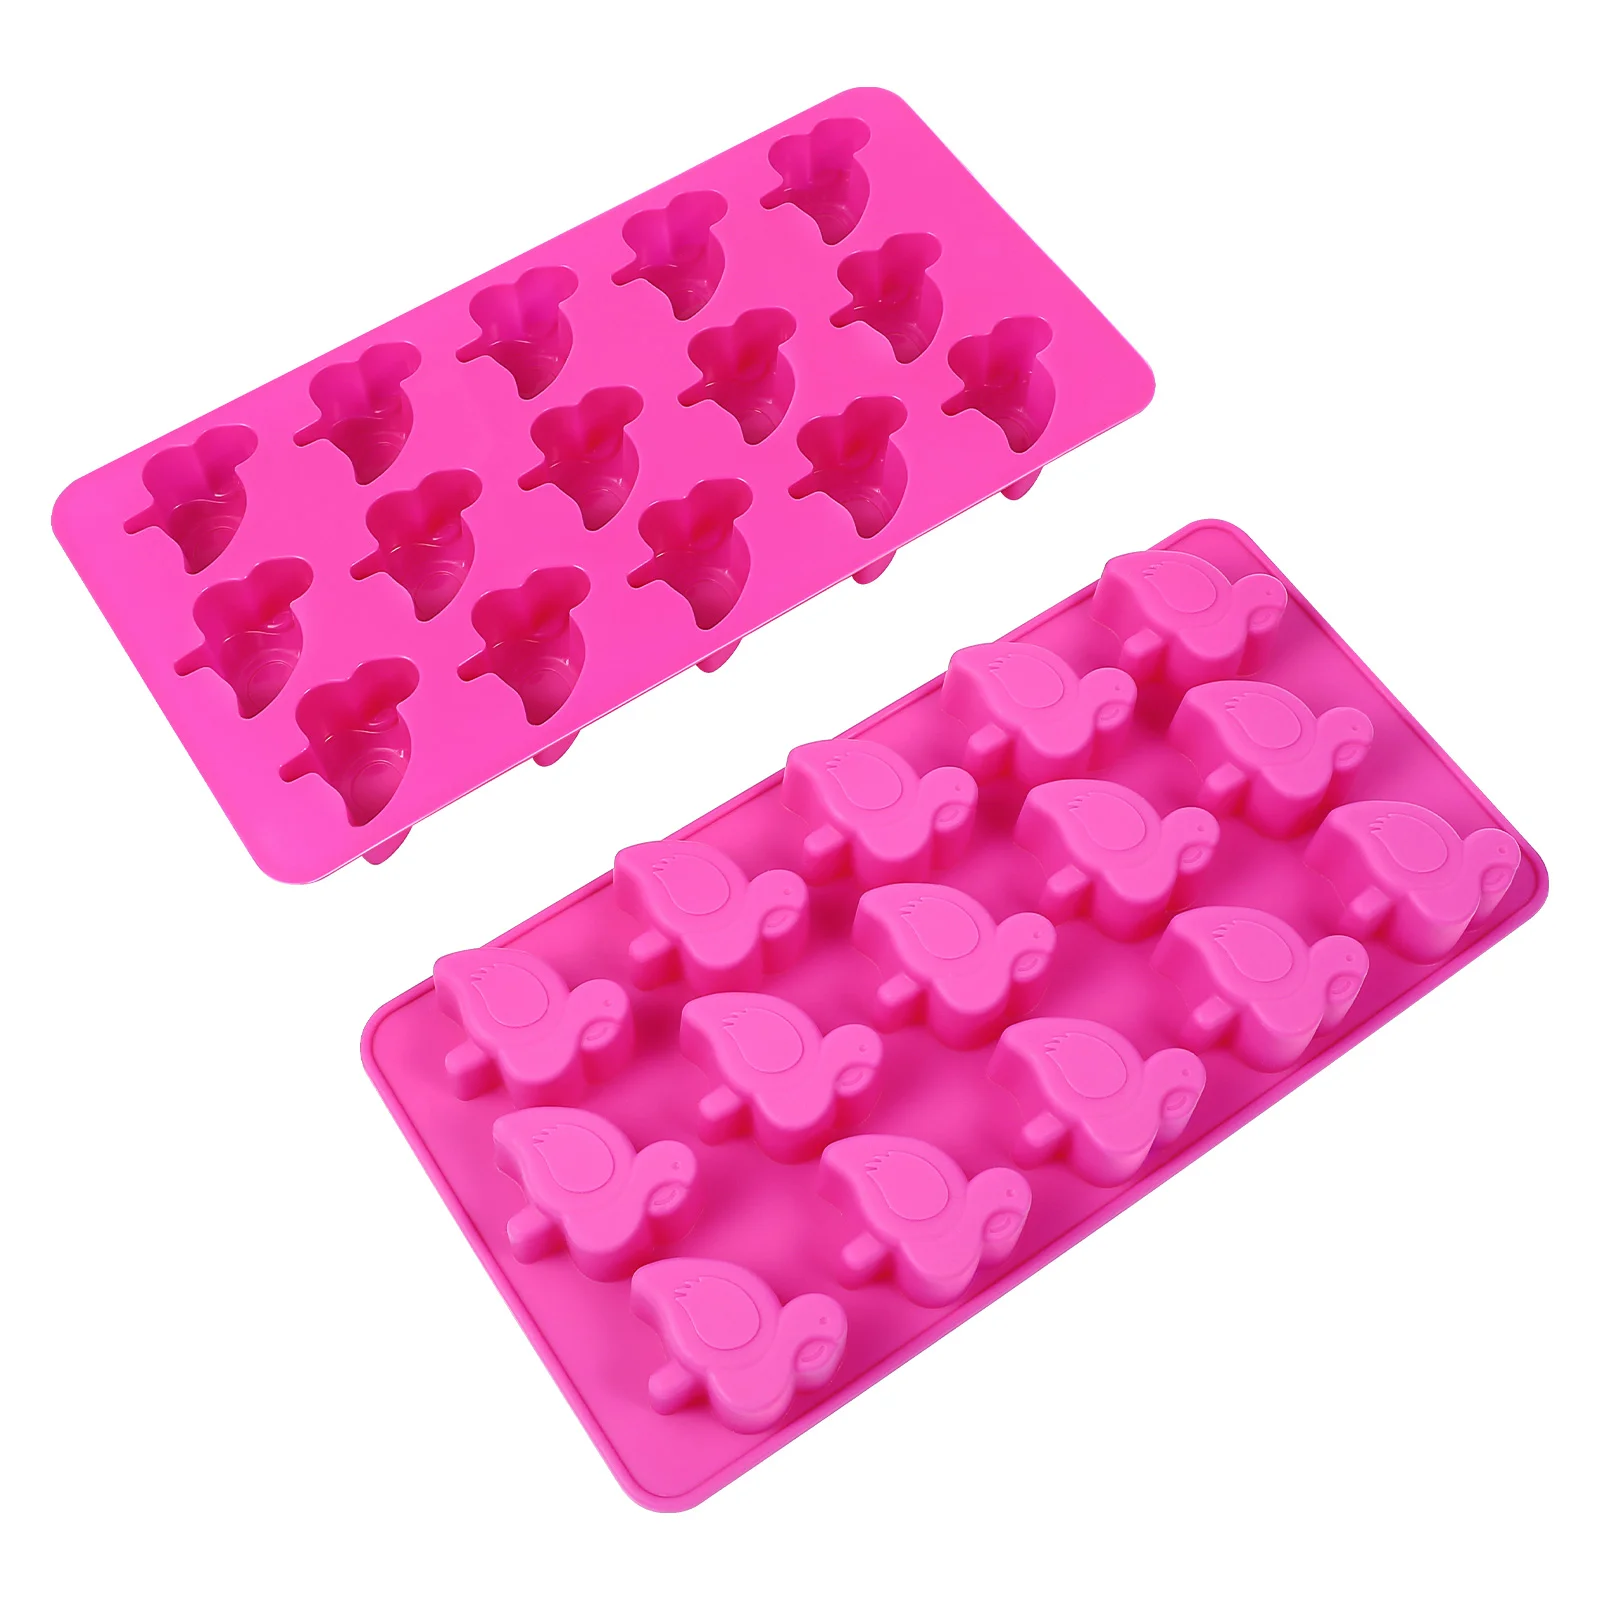 

Molds Silicone Flamingo Ice Candy Cake Mold Moulds Cube Chocolate Baking Tray Gummy Nonstick Chocolates Cute Trays Party Hawaii